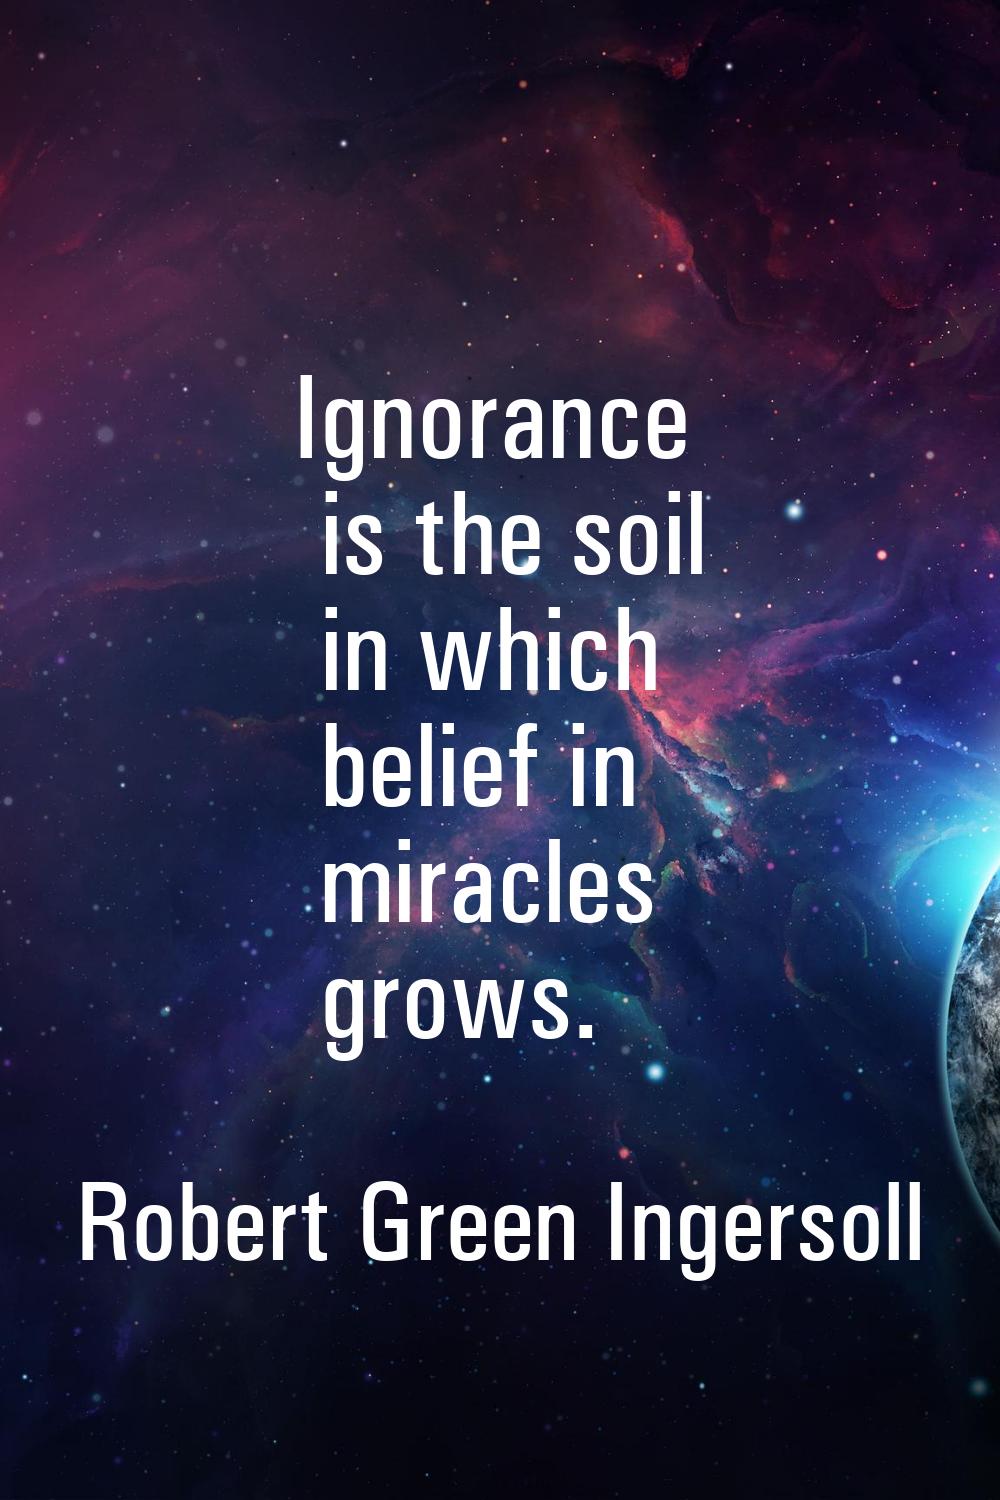 Ignorance is the soil in which belief in miracles grows.